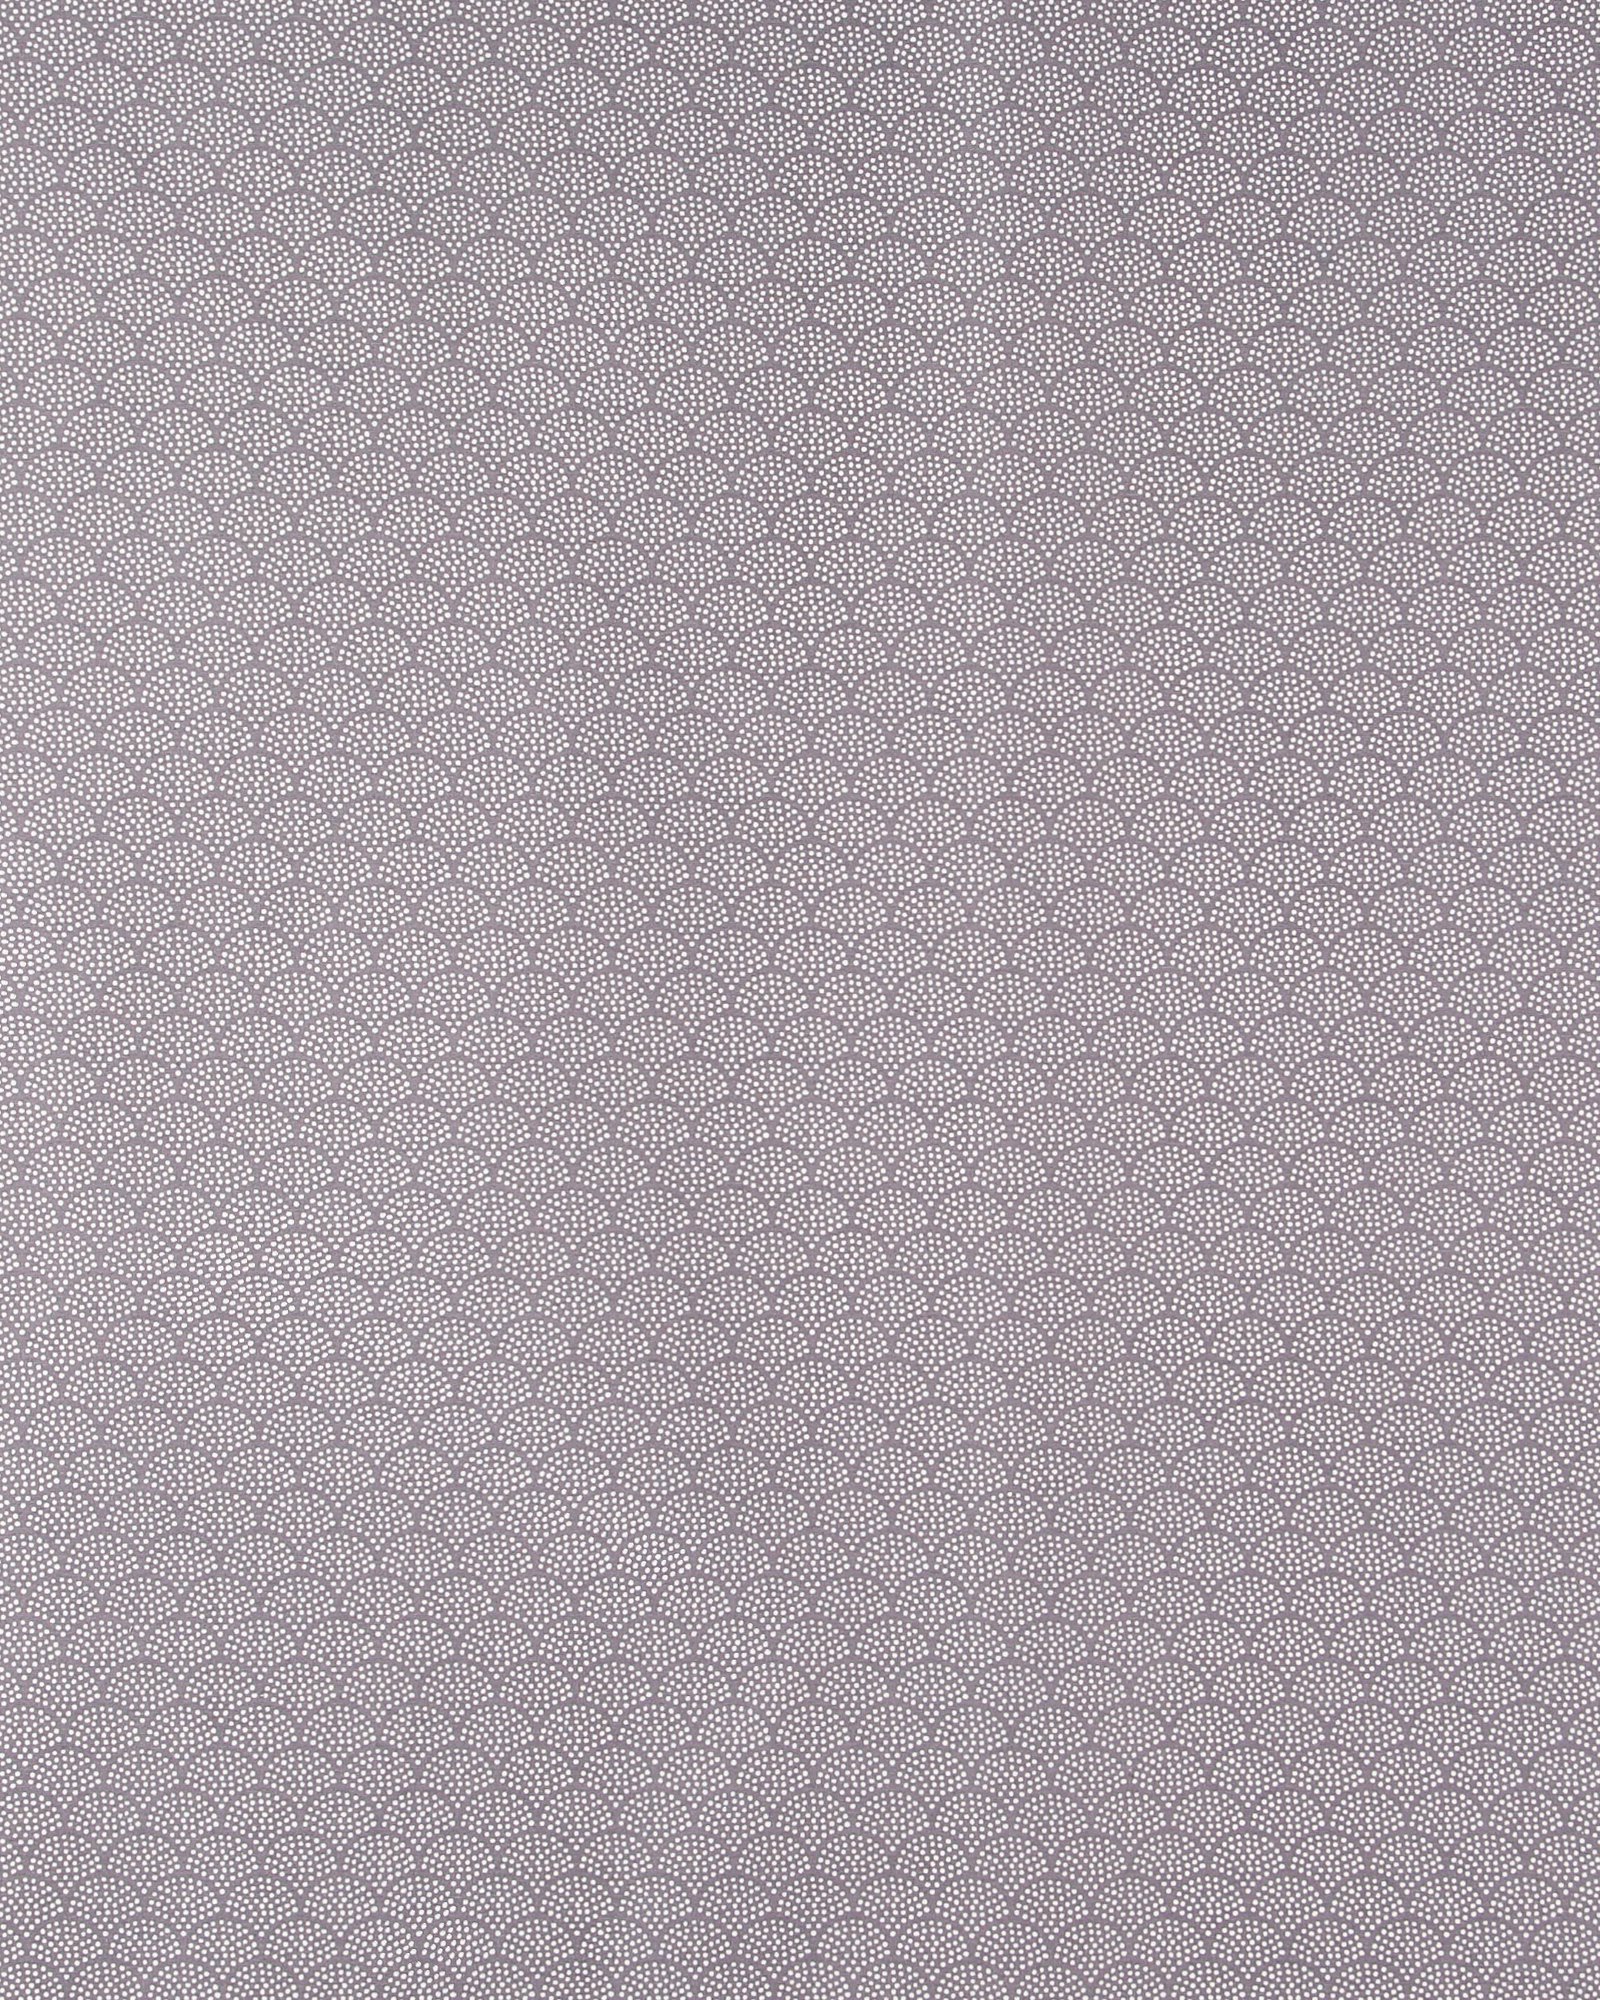 Woven oilcloth dusty purple/white arches 870367_pack_sp